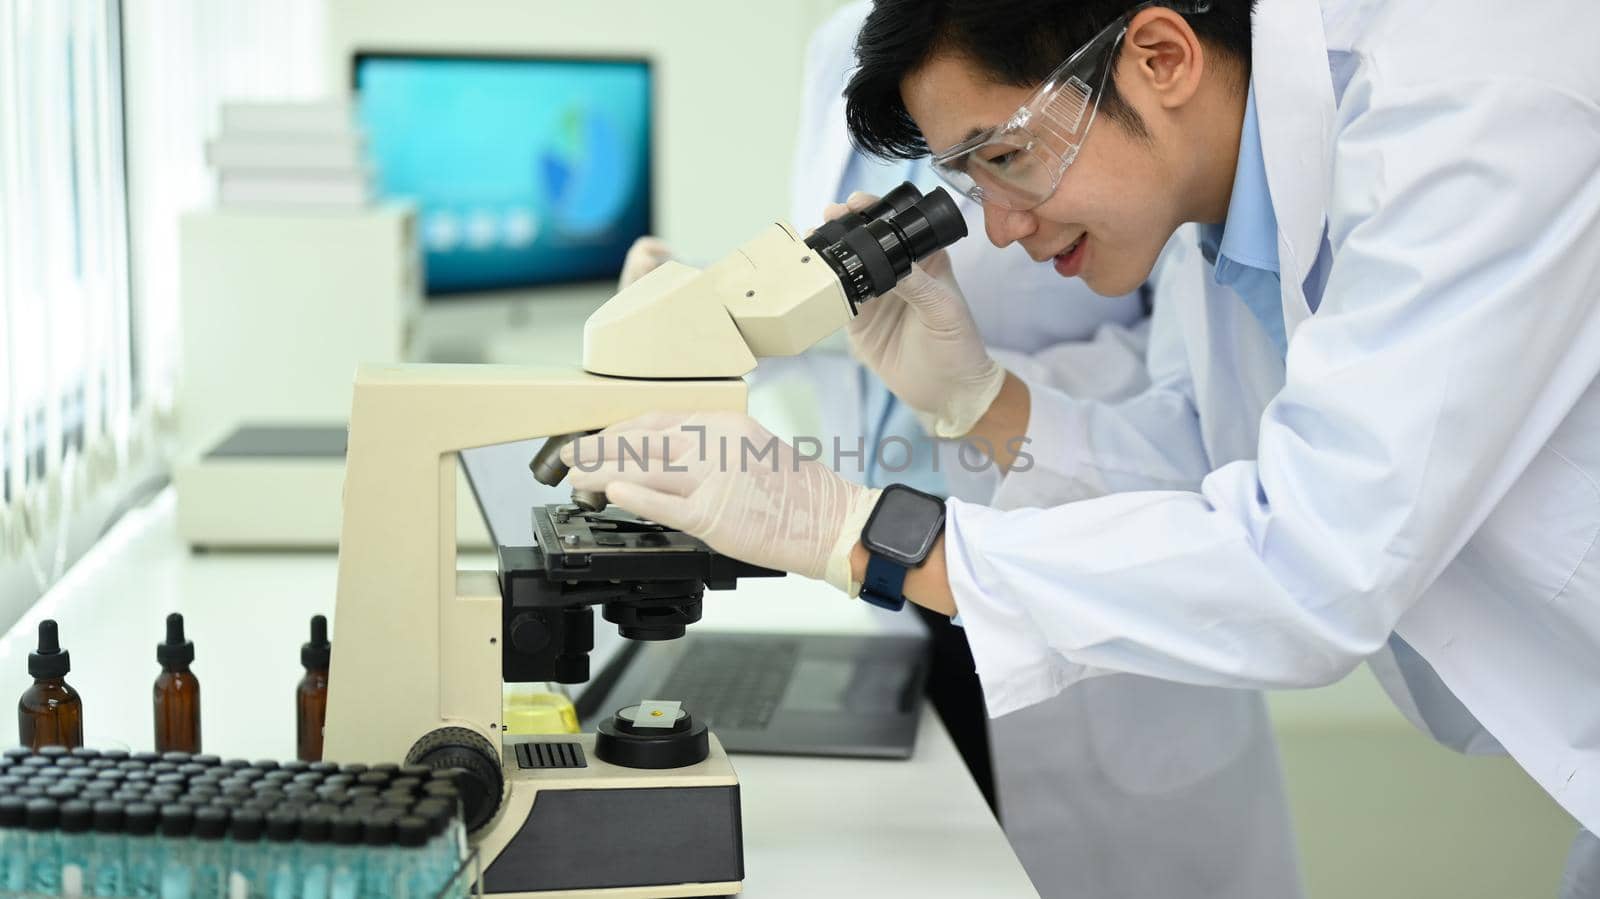 Professional biotechnology specialist looking under microscope, conducting experiment in a laboratory.